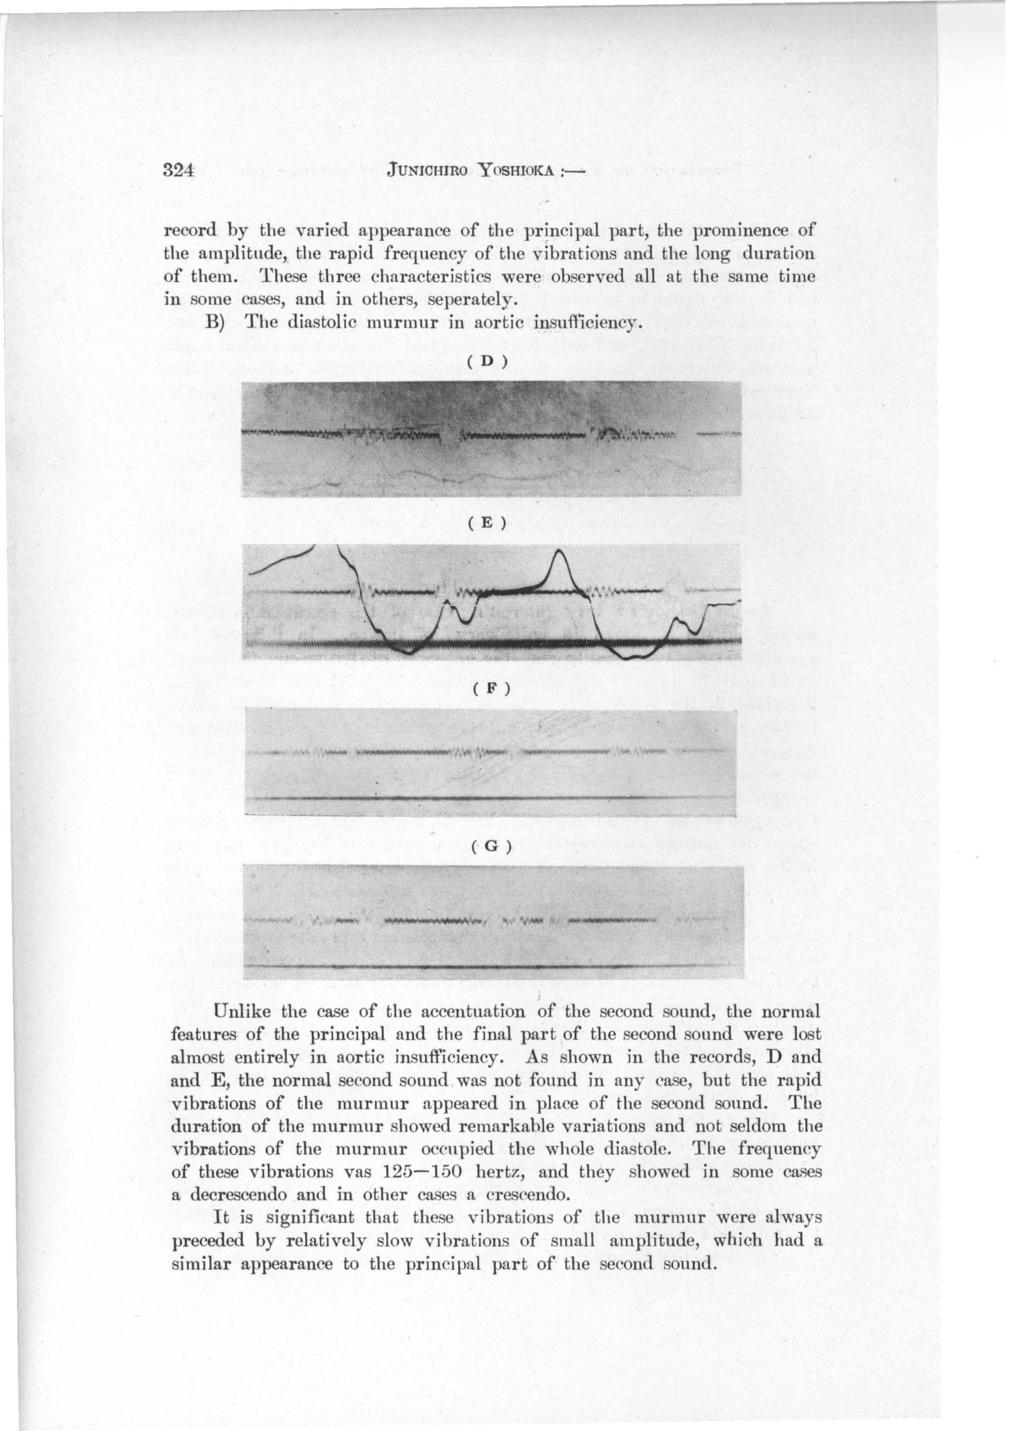 324 JUNICHIRO YOSHIOKA:- record by the varied appearance of the principal part, the prominence of the amplitude, the rapid frequency of the vibrations and the long duration of them.